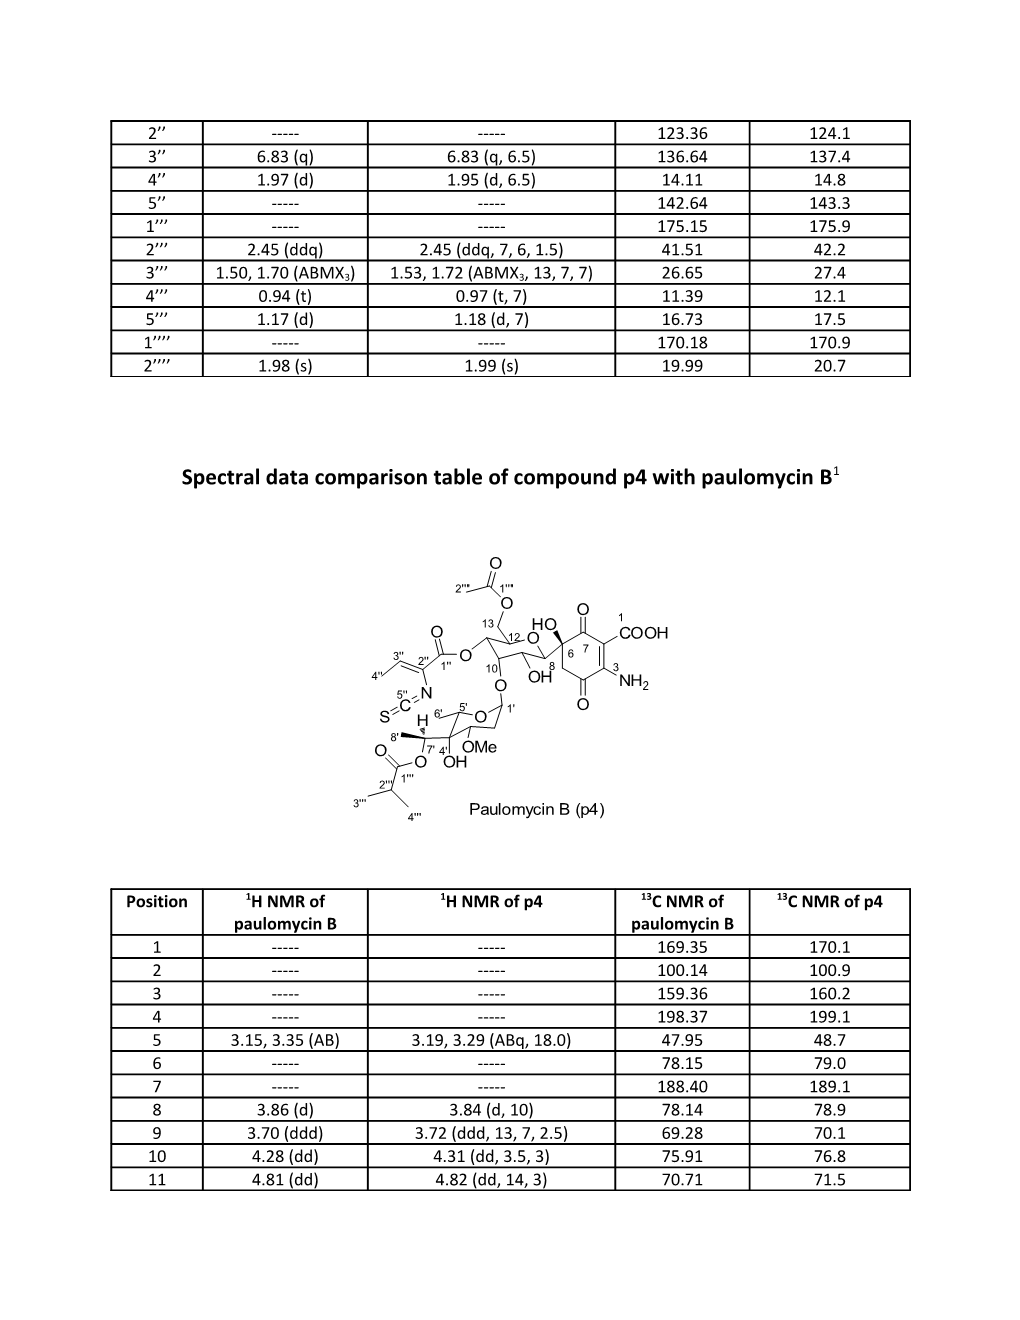 Spectral Data Comparison Table of Compound P5 with Paulomycin a 1